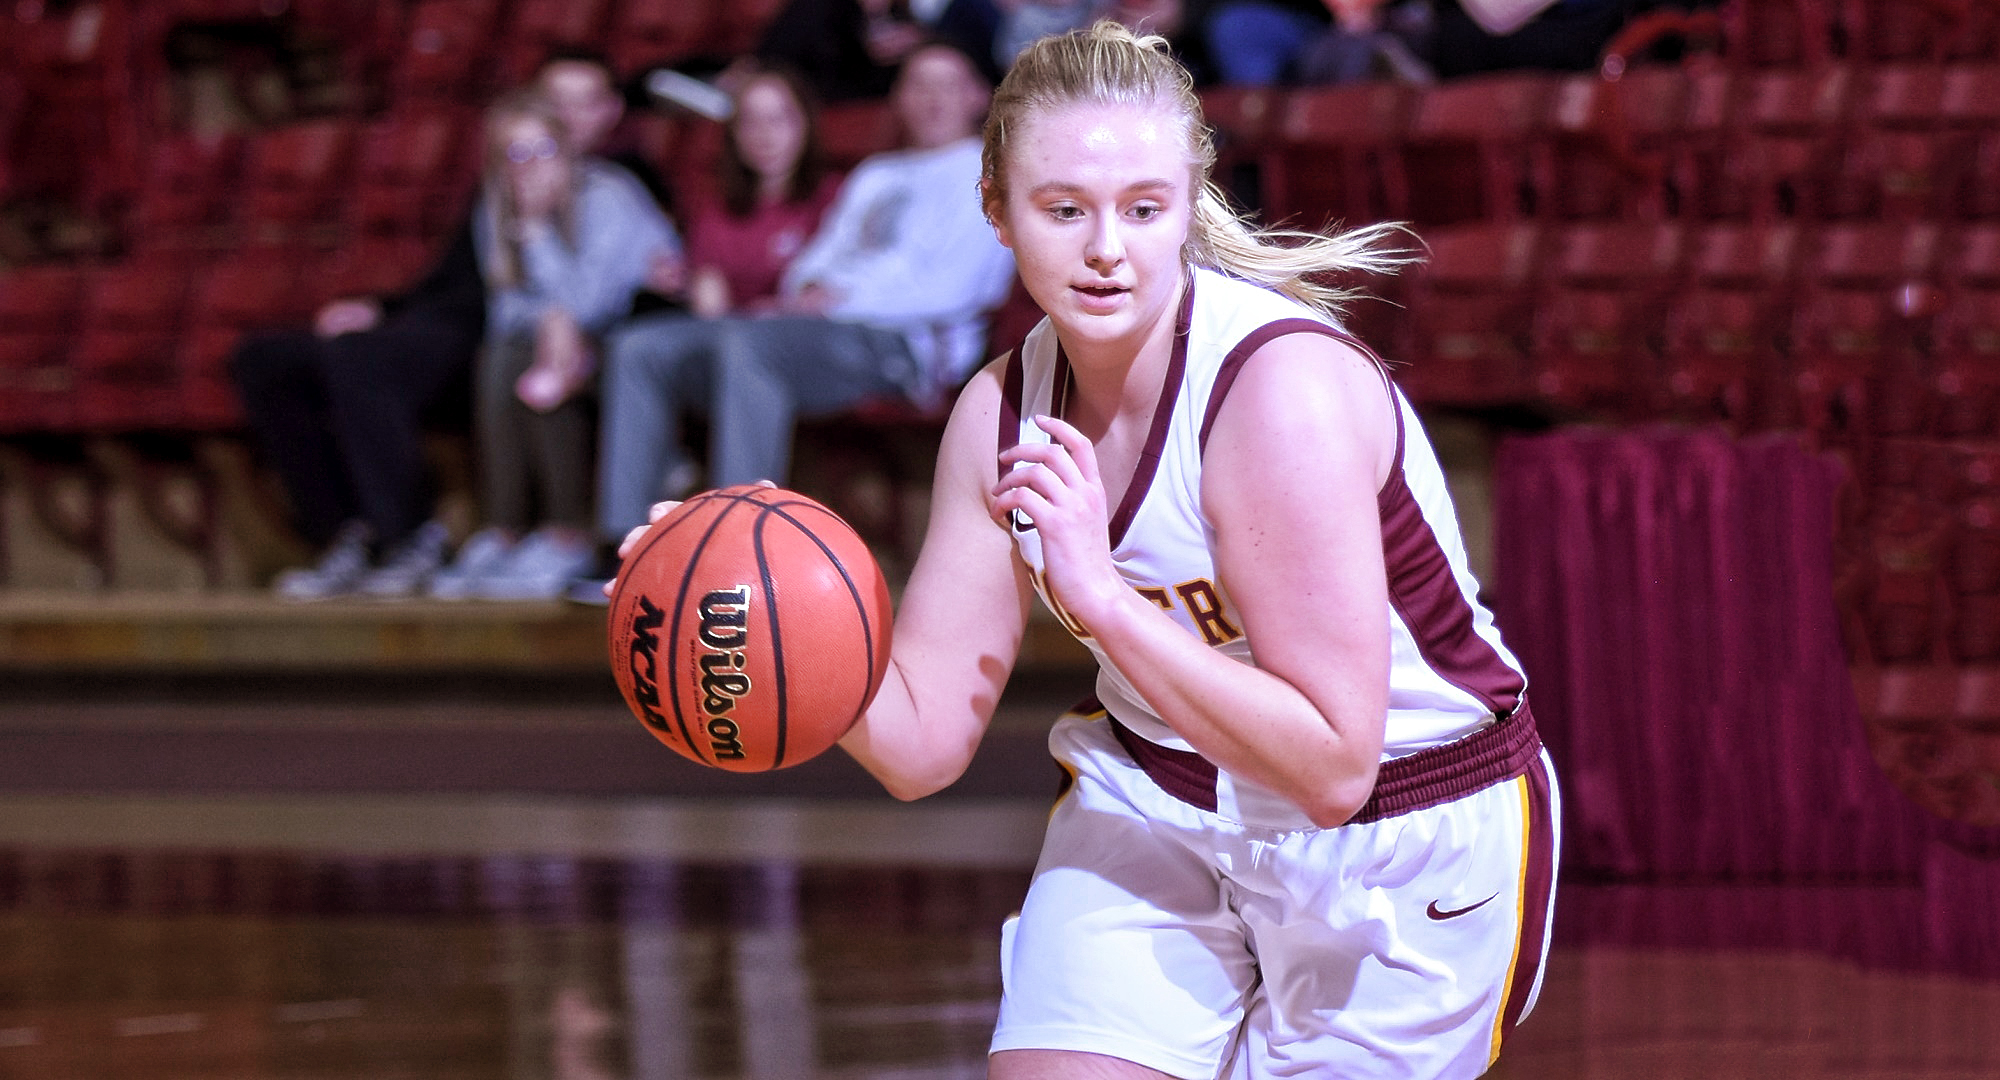 Sophomore Bailee Larson went 4-for-9 from the floor and scored a career-high 12 points to go along with six rebounds in the Cobbers' game at St. Benedict.